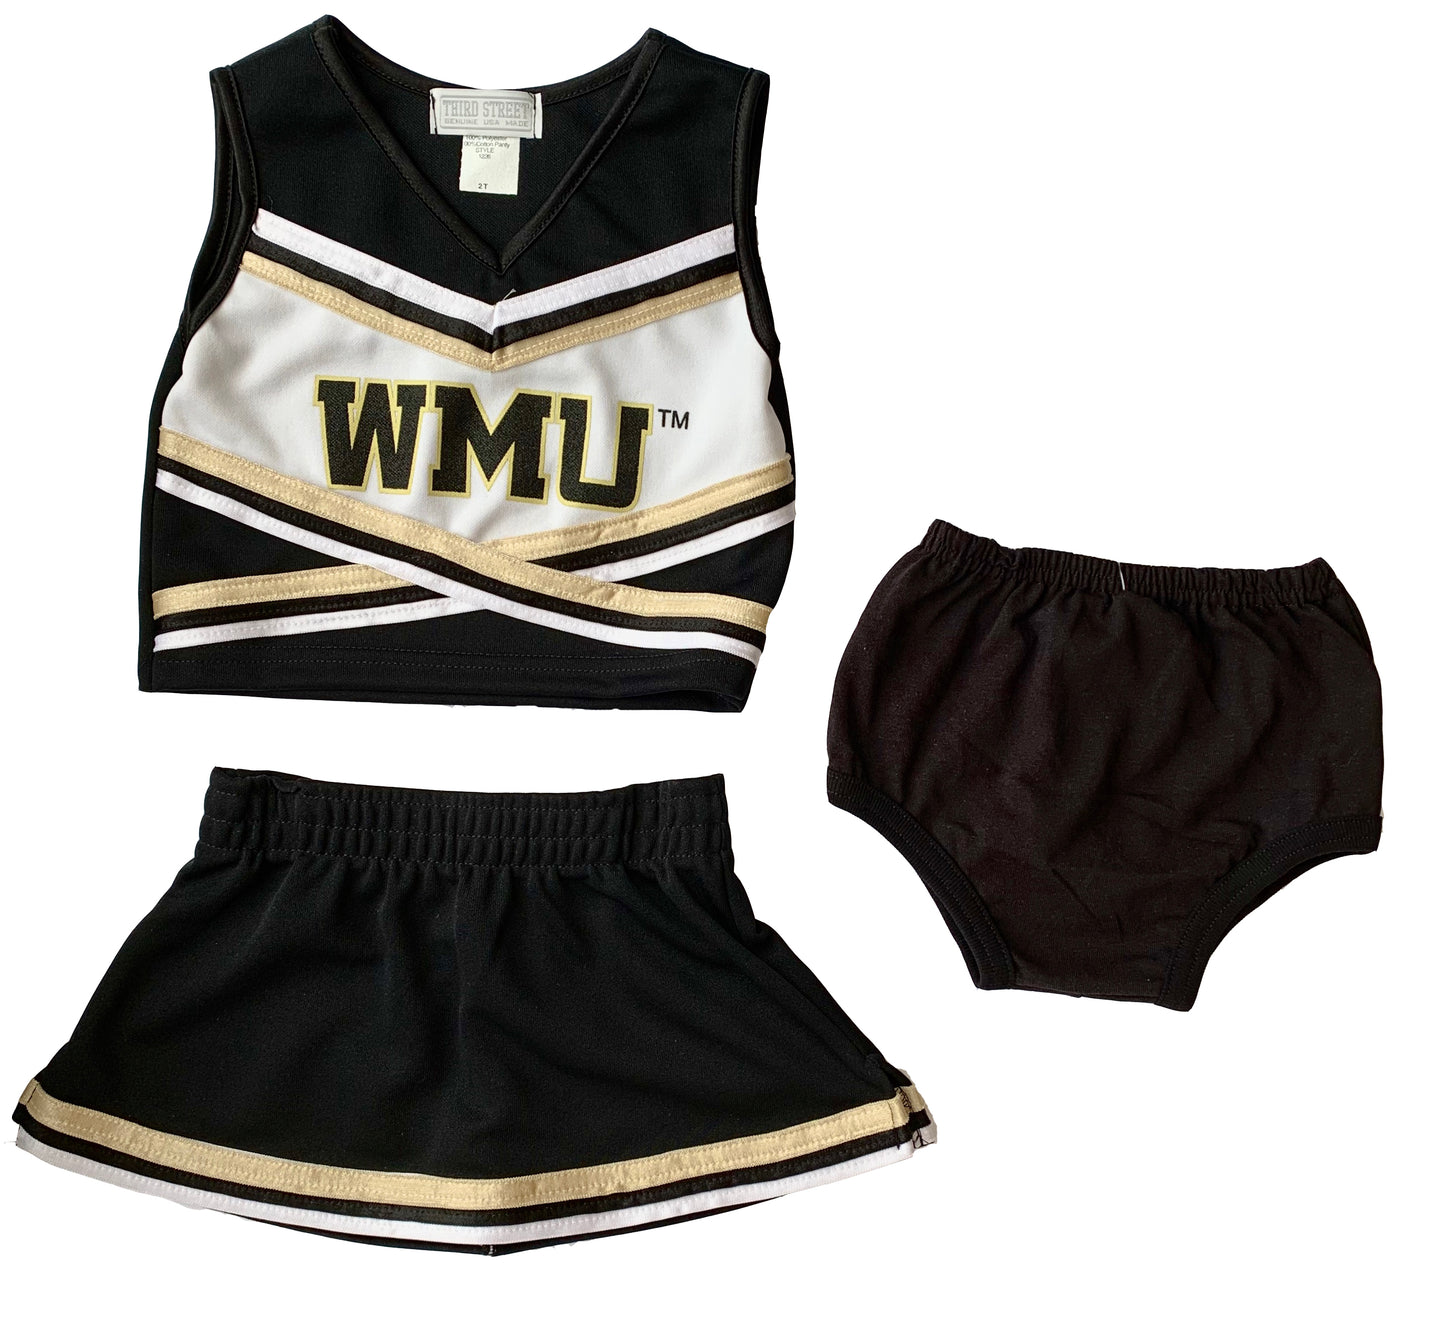 WMU Toddler Cheer Outfit